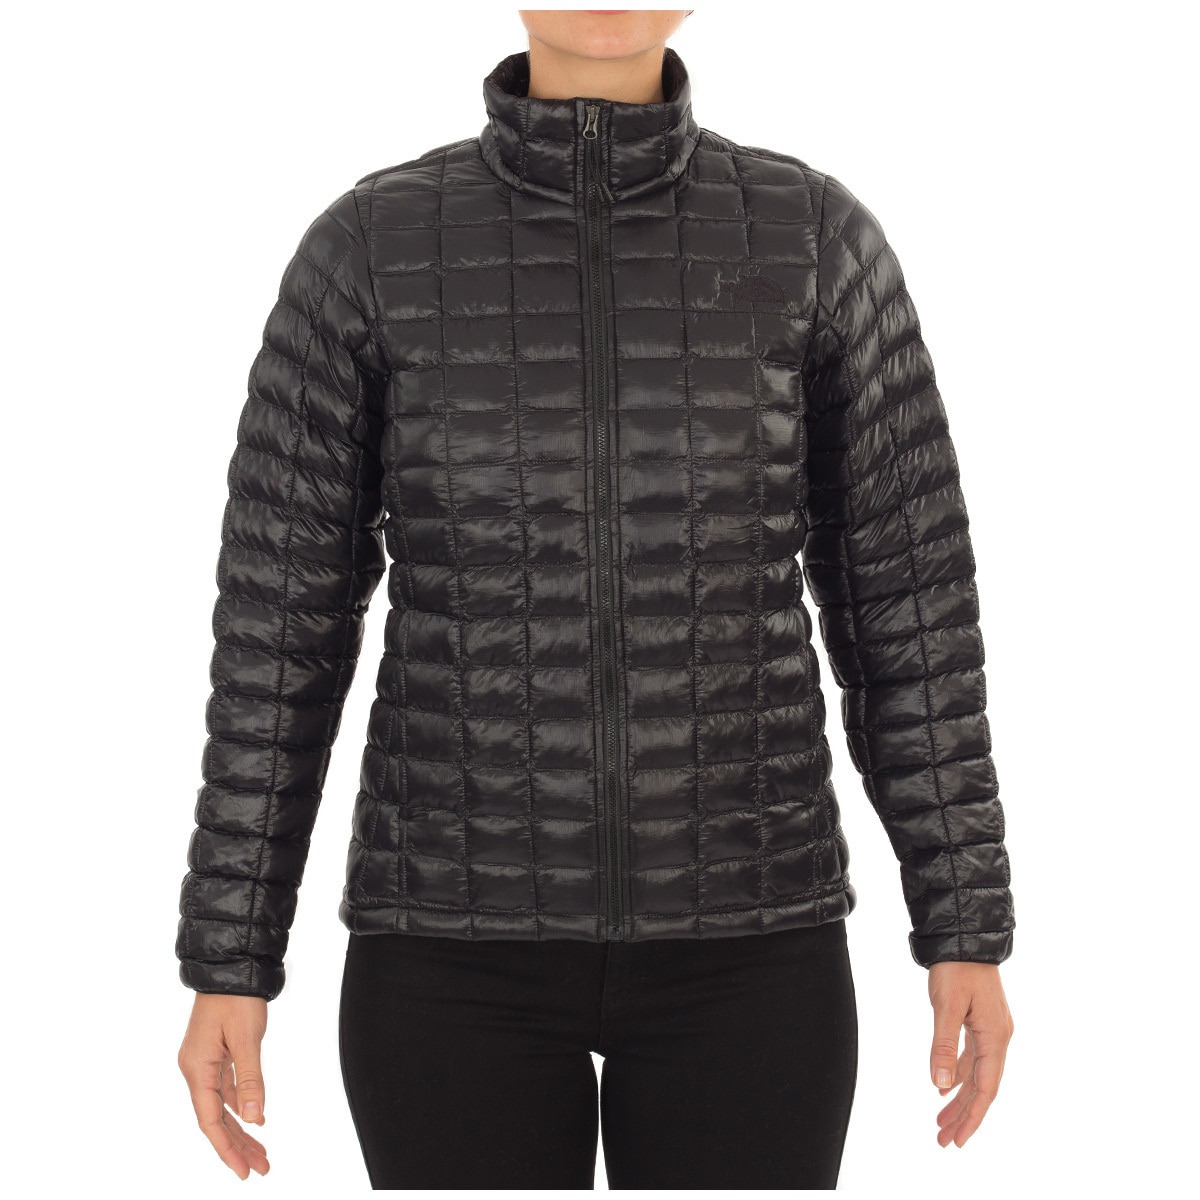 costco the north face jacket